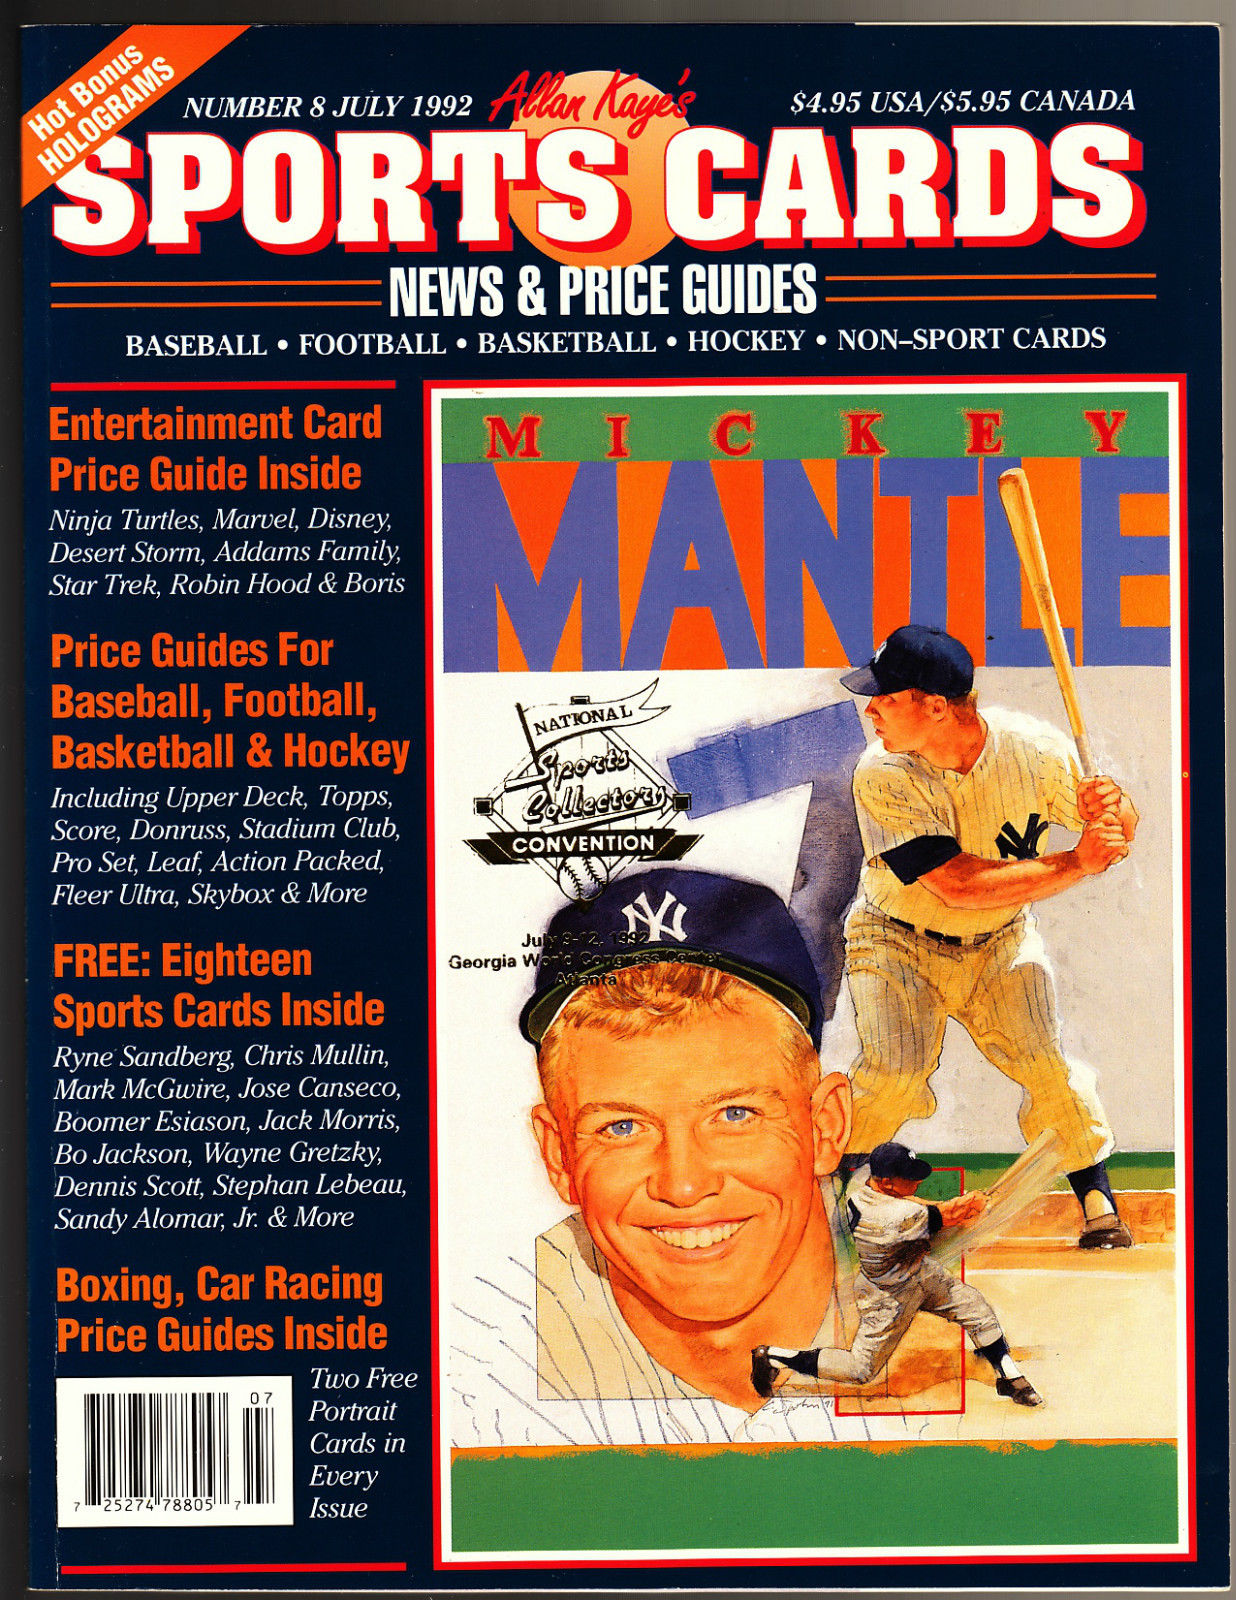 mainecomicguy : Allan Kaye's SPORTS CARDS News & Price Guides #8 ...